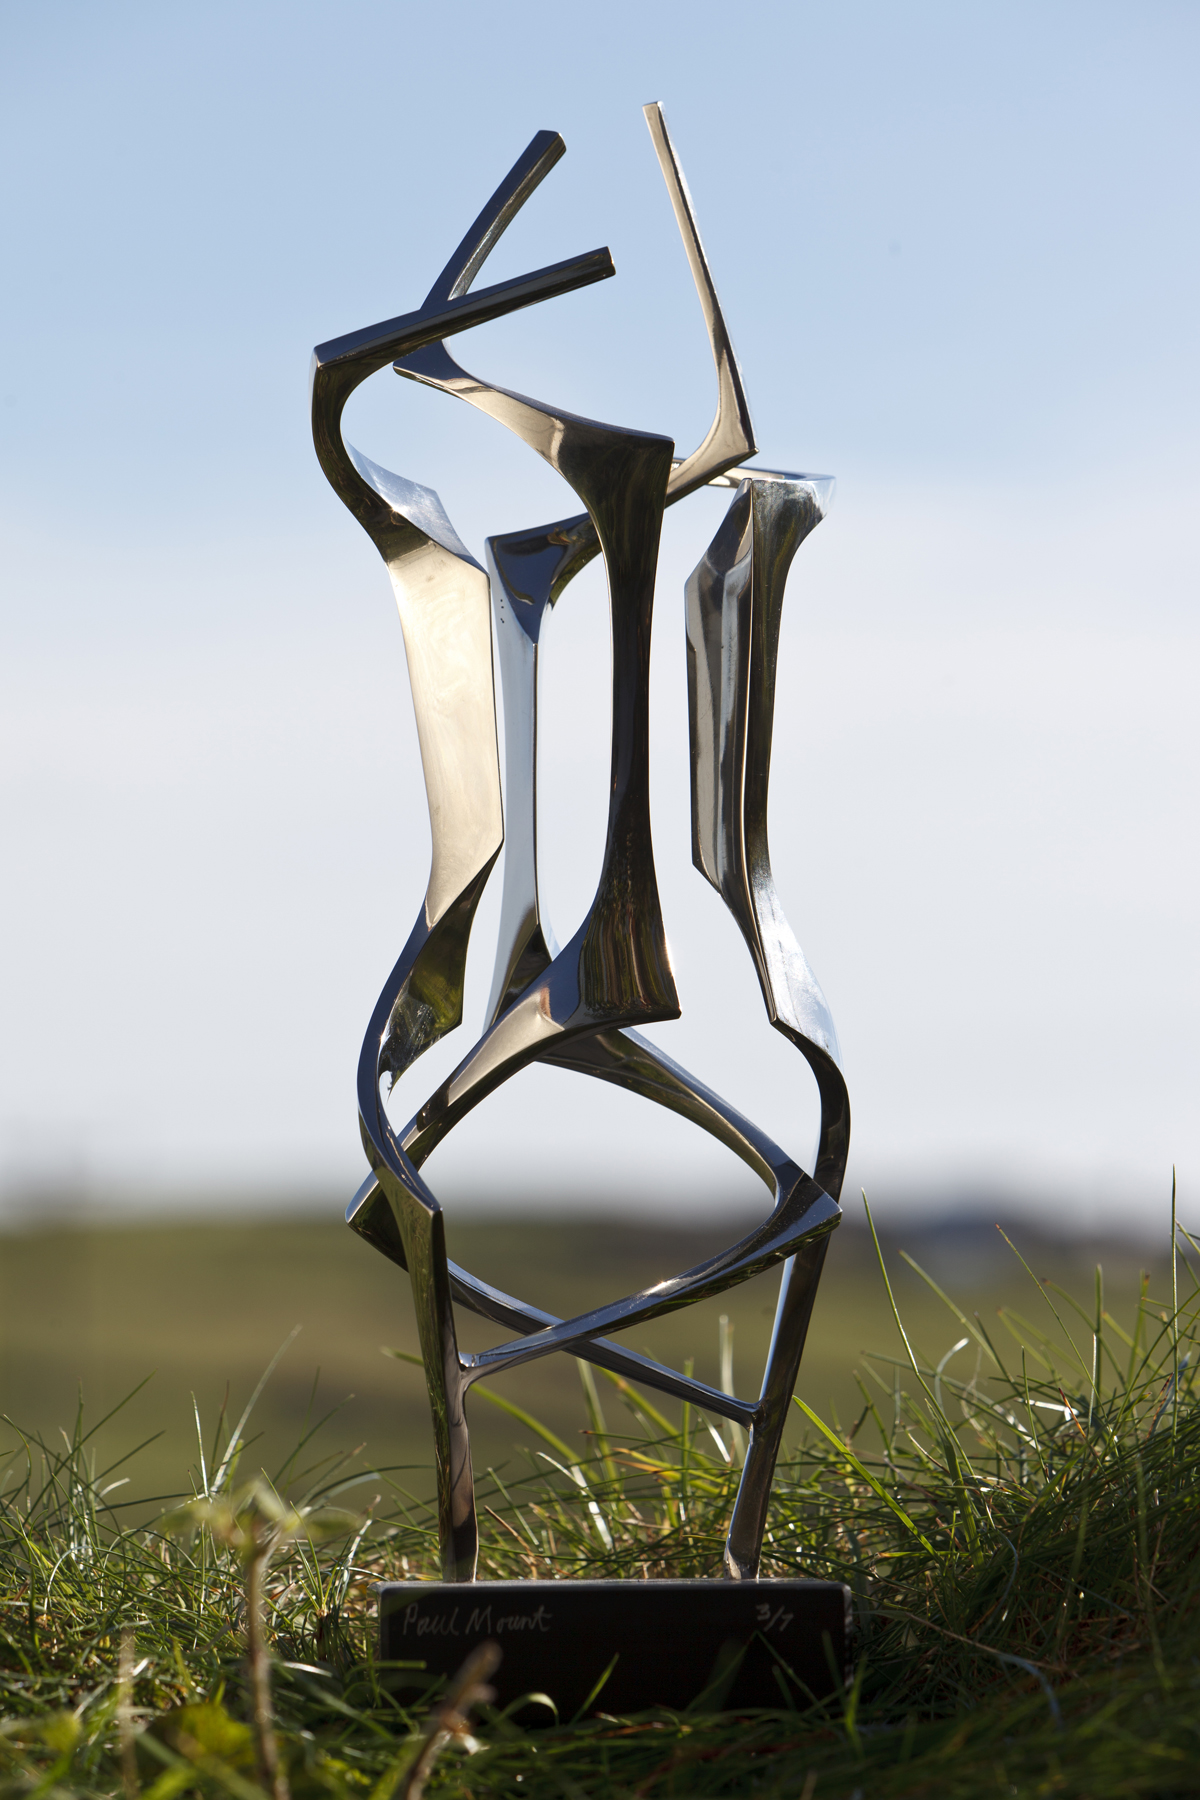 Allegro (1988), Stainless Steel, Edition of 7, H34cm